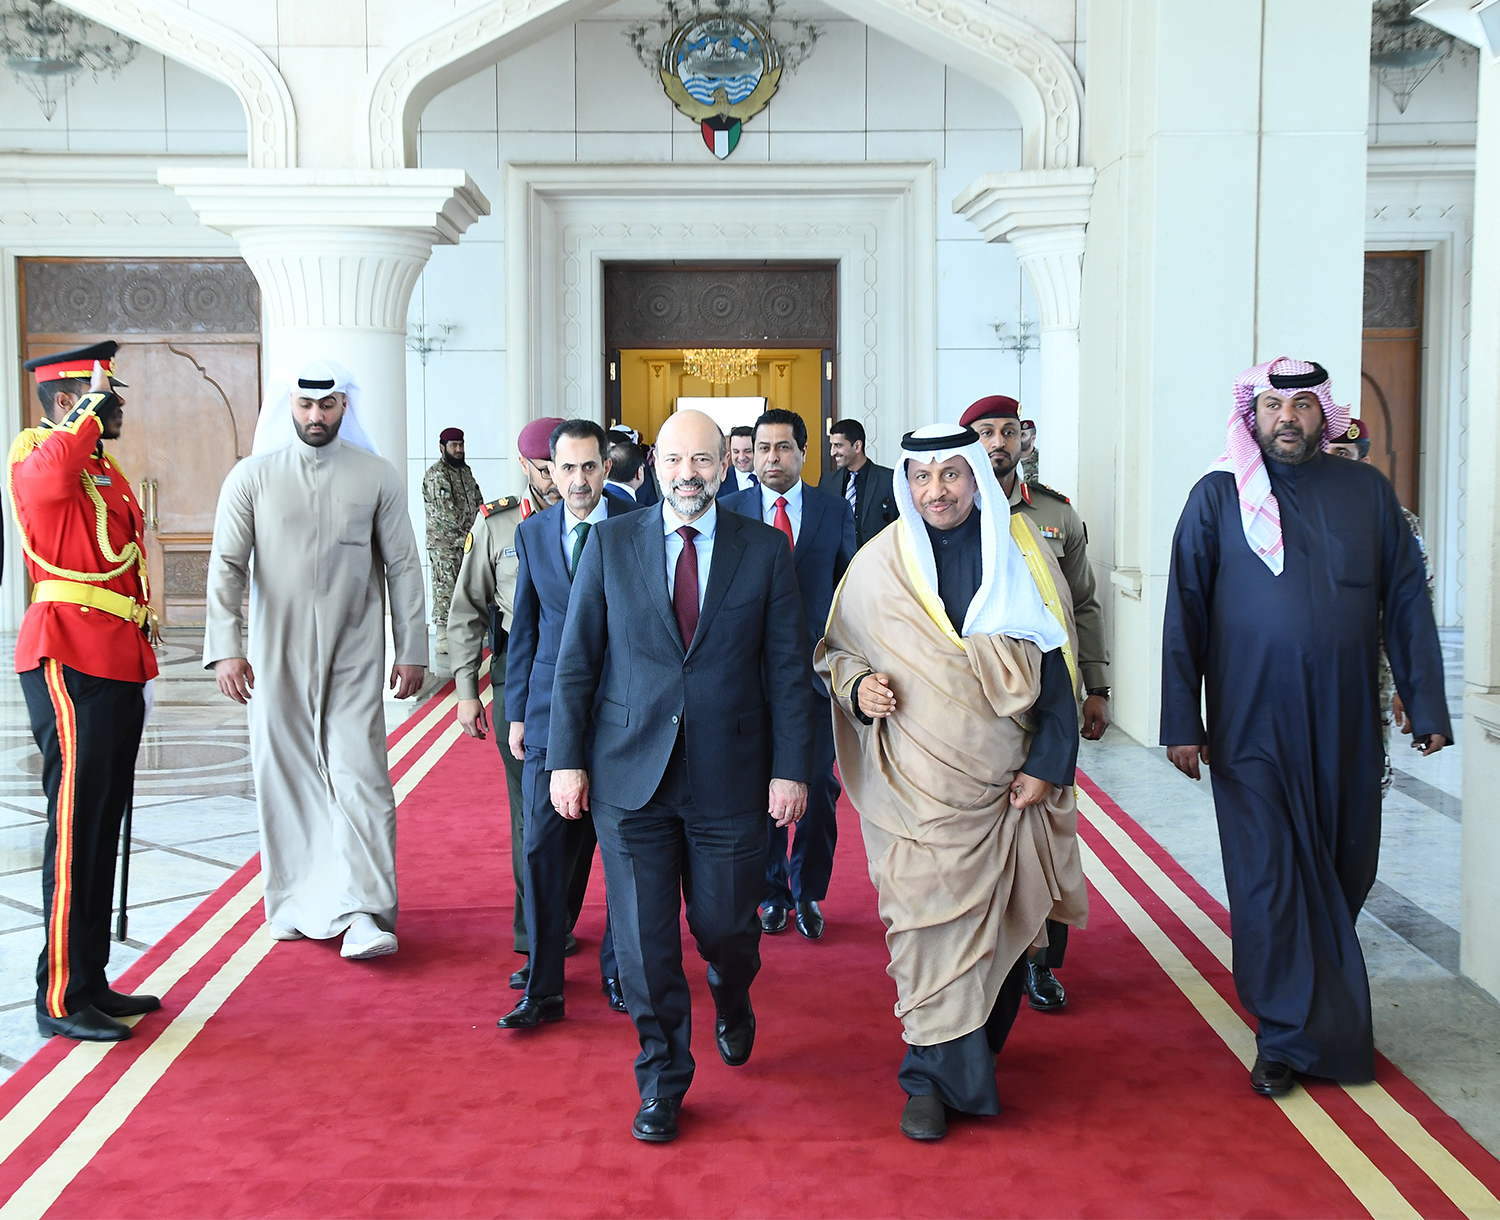 His Highness the Prime Minister Sheikh Jaber Al-Mubarak Al-Hamad Al-Sabah and his visiting Jordanian counterpart Omar Al-Razaz during his departure after a short official visit to the country